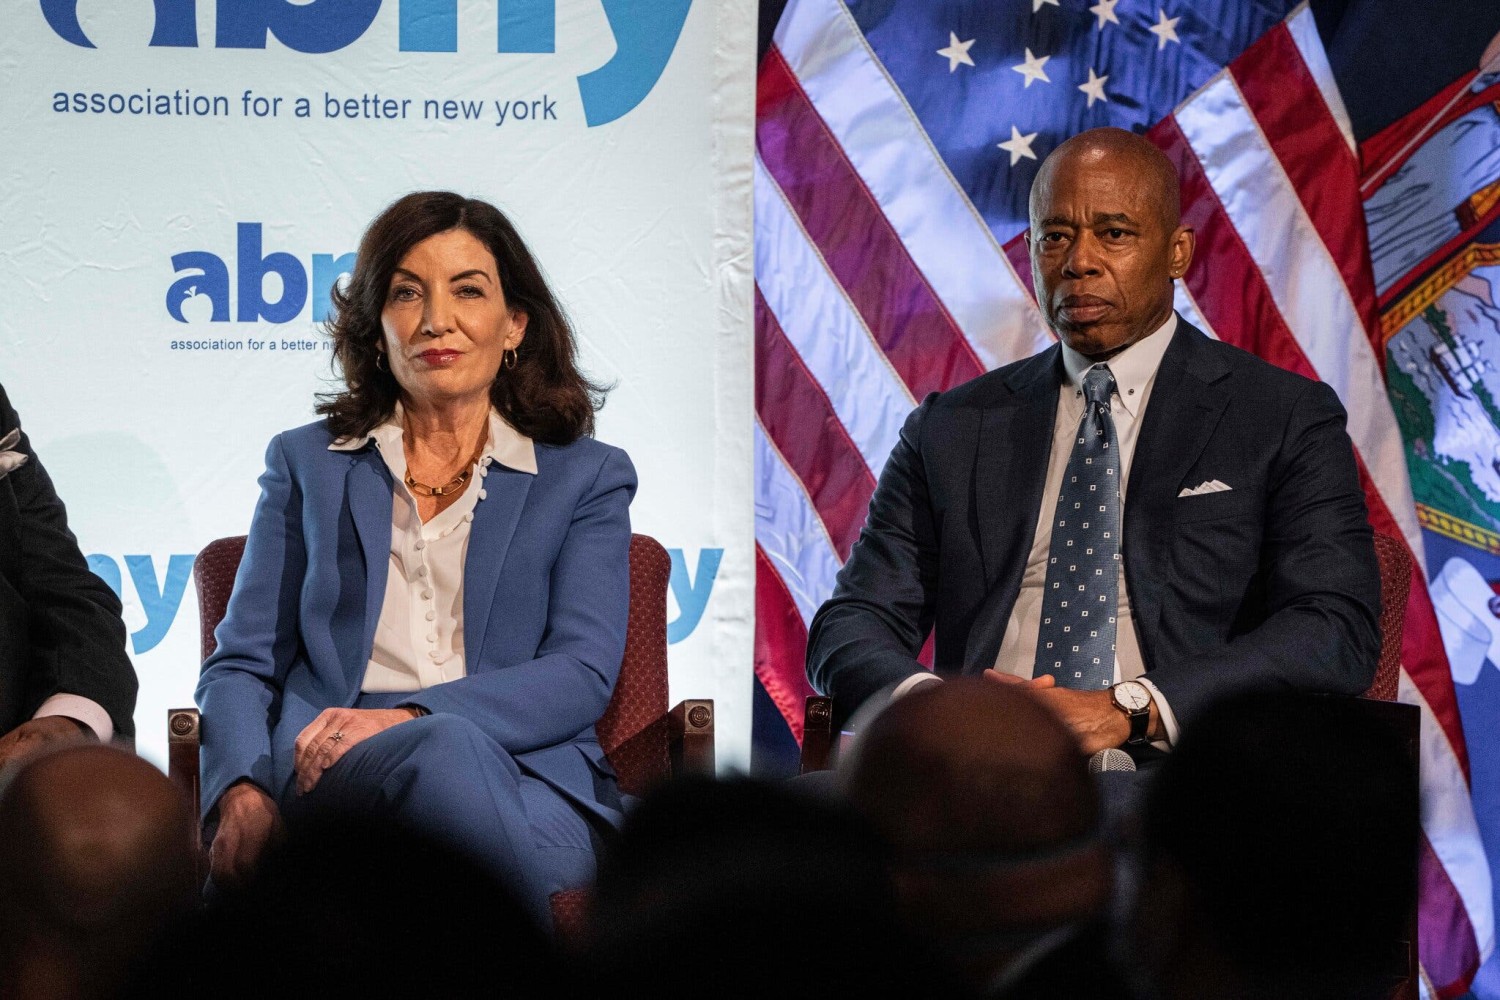 Gov. Kathy Hochul and Mayor Eric Adams last year. The two leaders seemed to turn on each other this week, each accusing the other of an inadequate response to the migrant crisis. Credit...Hiroko Masuike/The New York Times